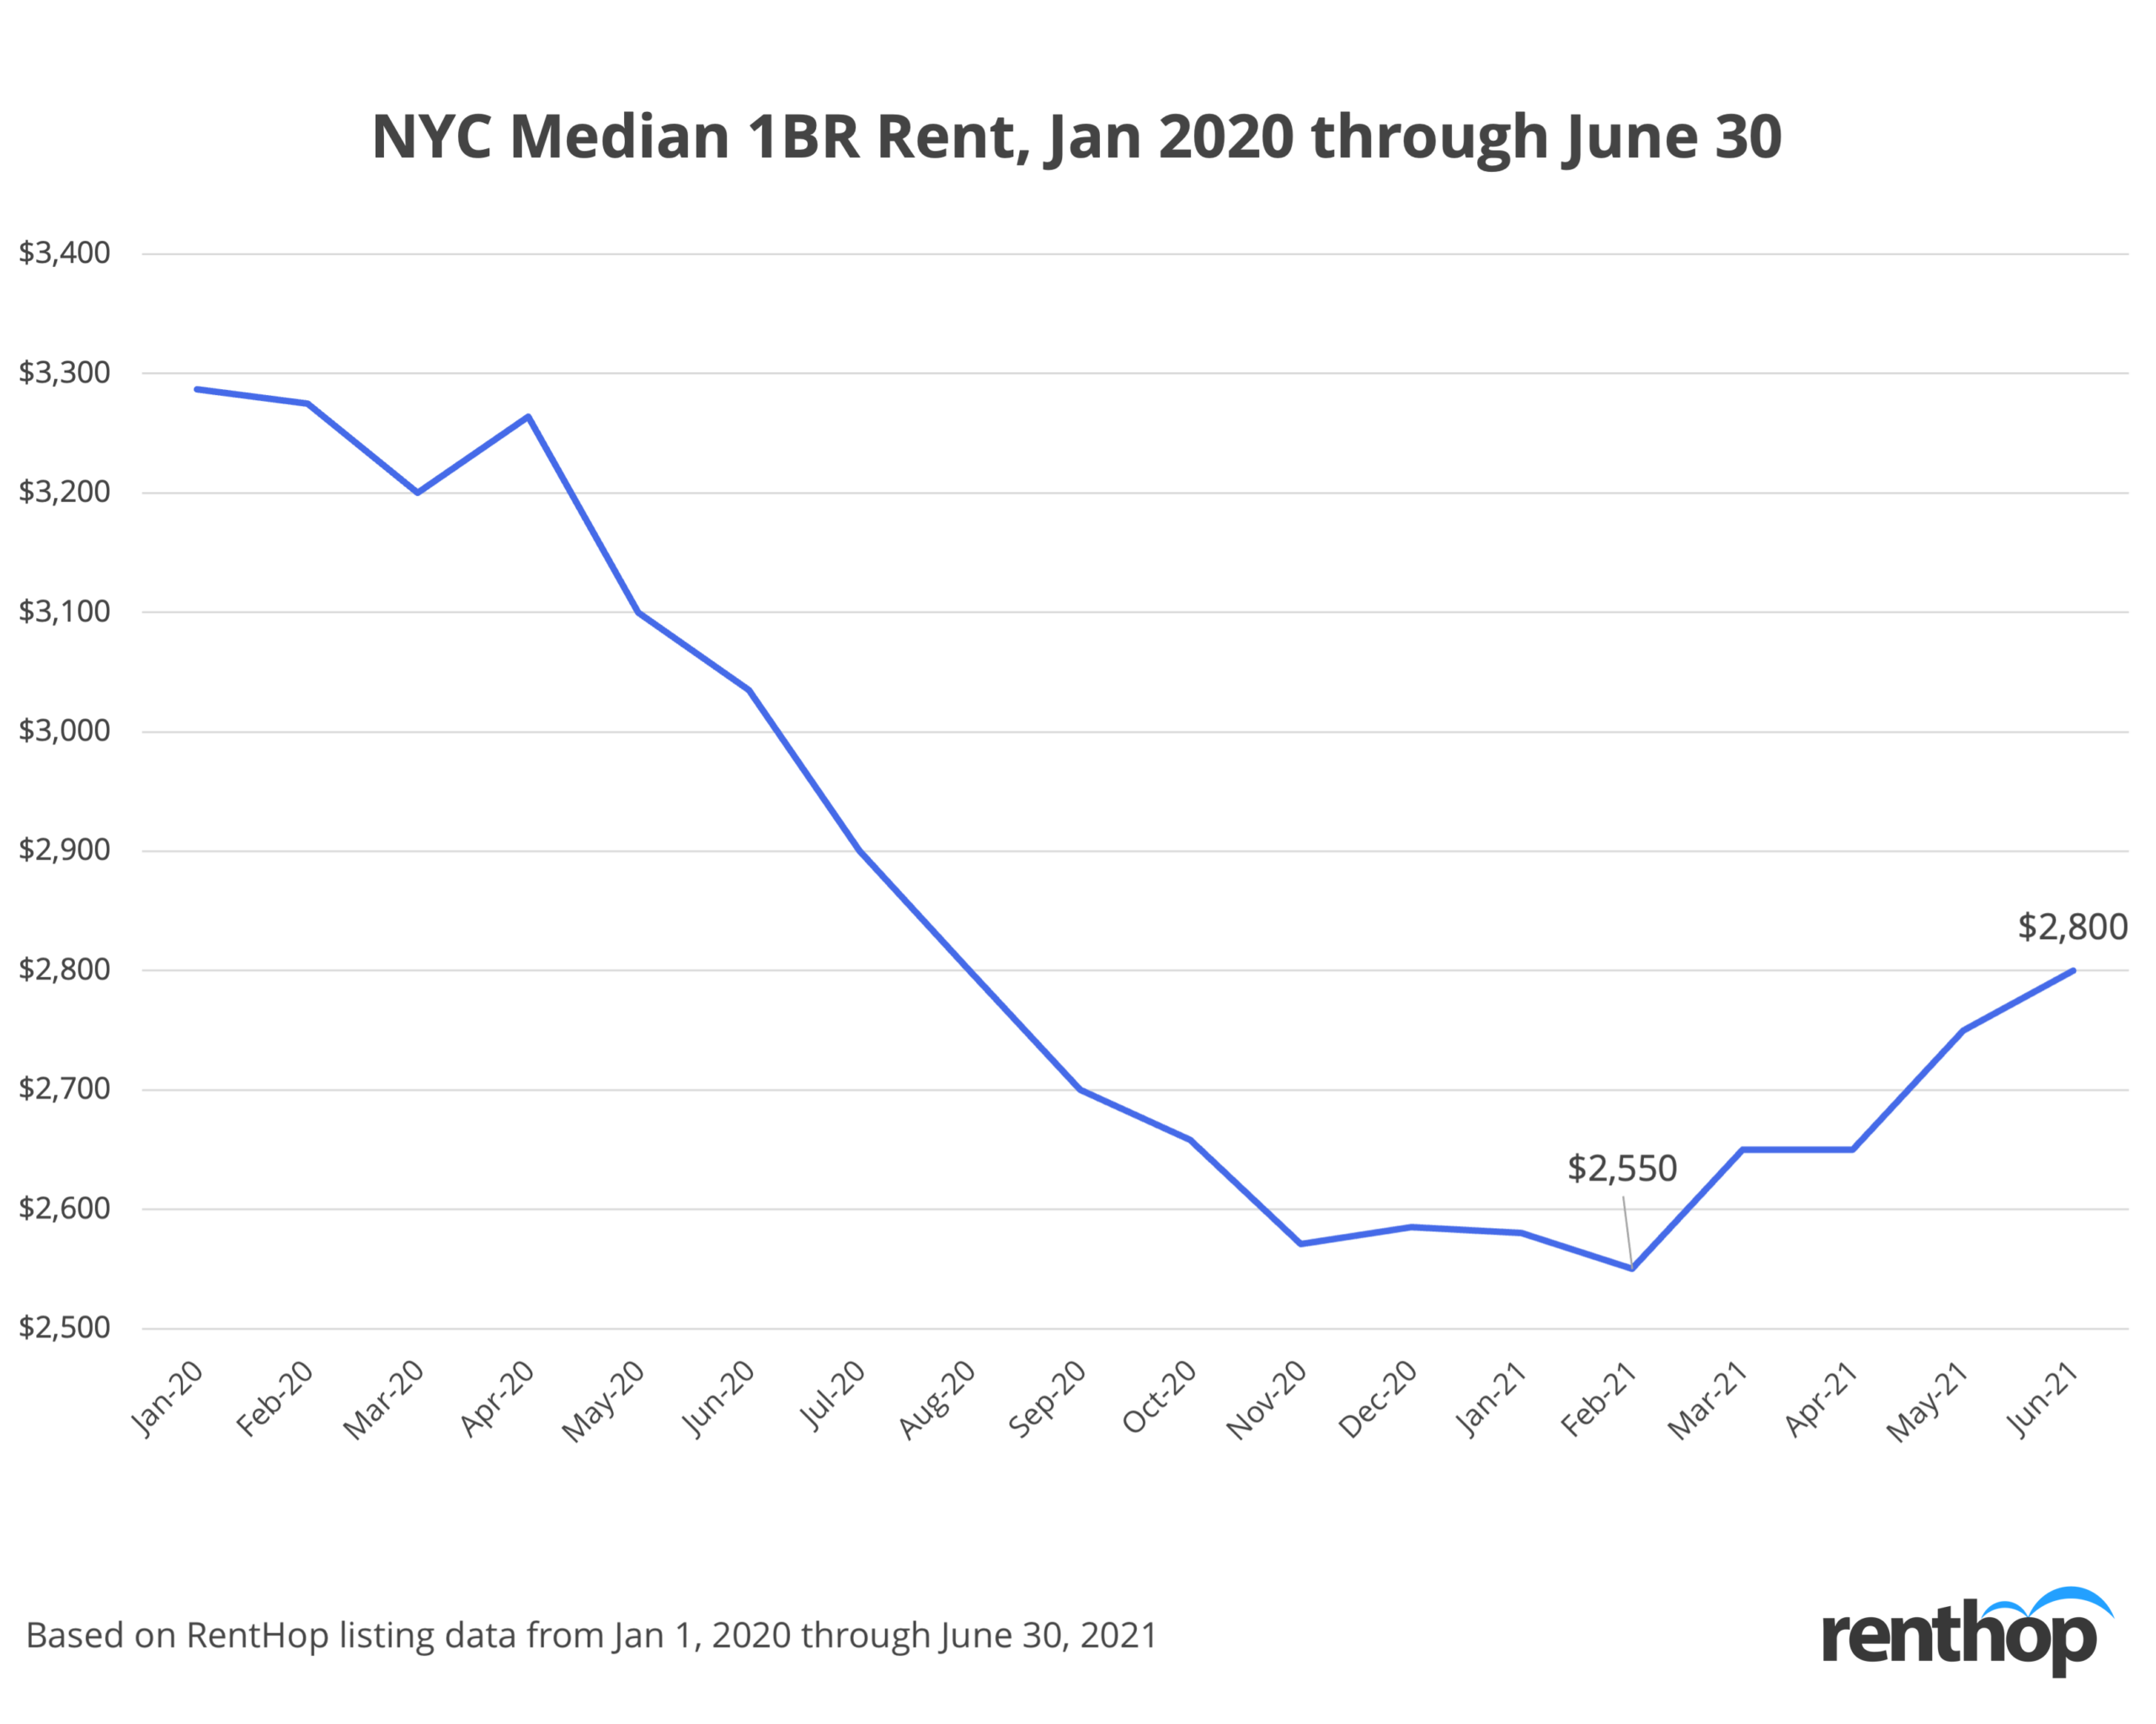 Median 1BR Rent in NYC